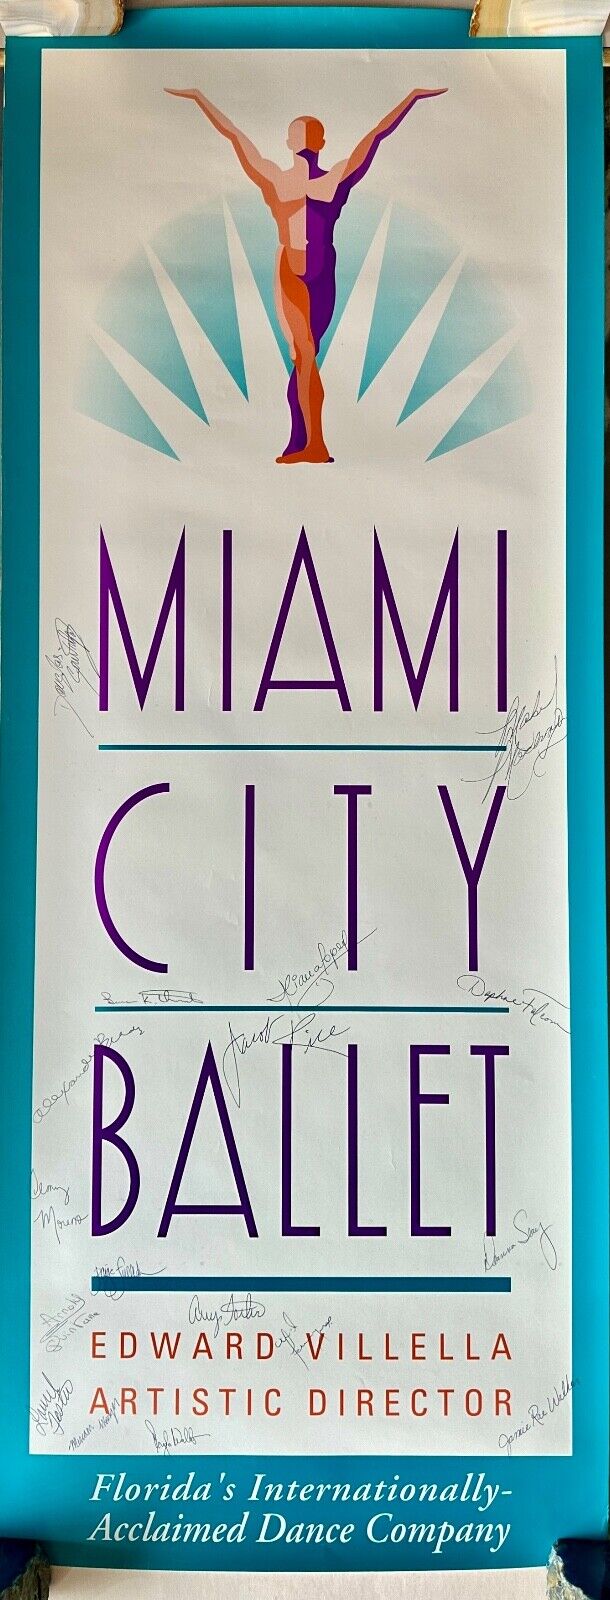 Ballet Miami City Ballet Signed Poster Classic Art Inspired by Edward Villella